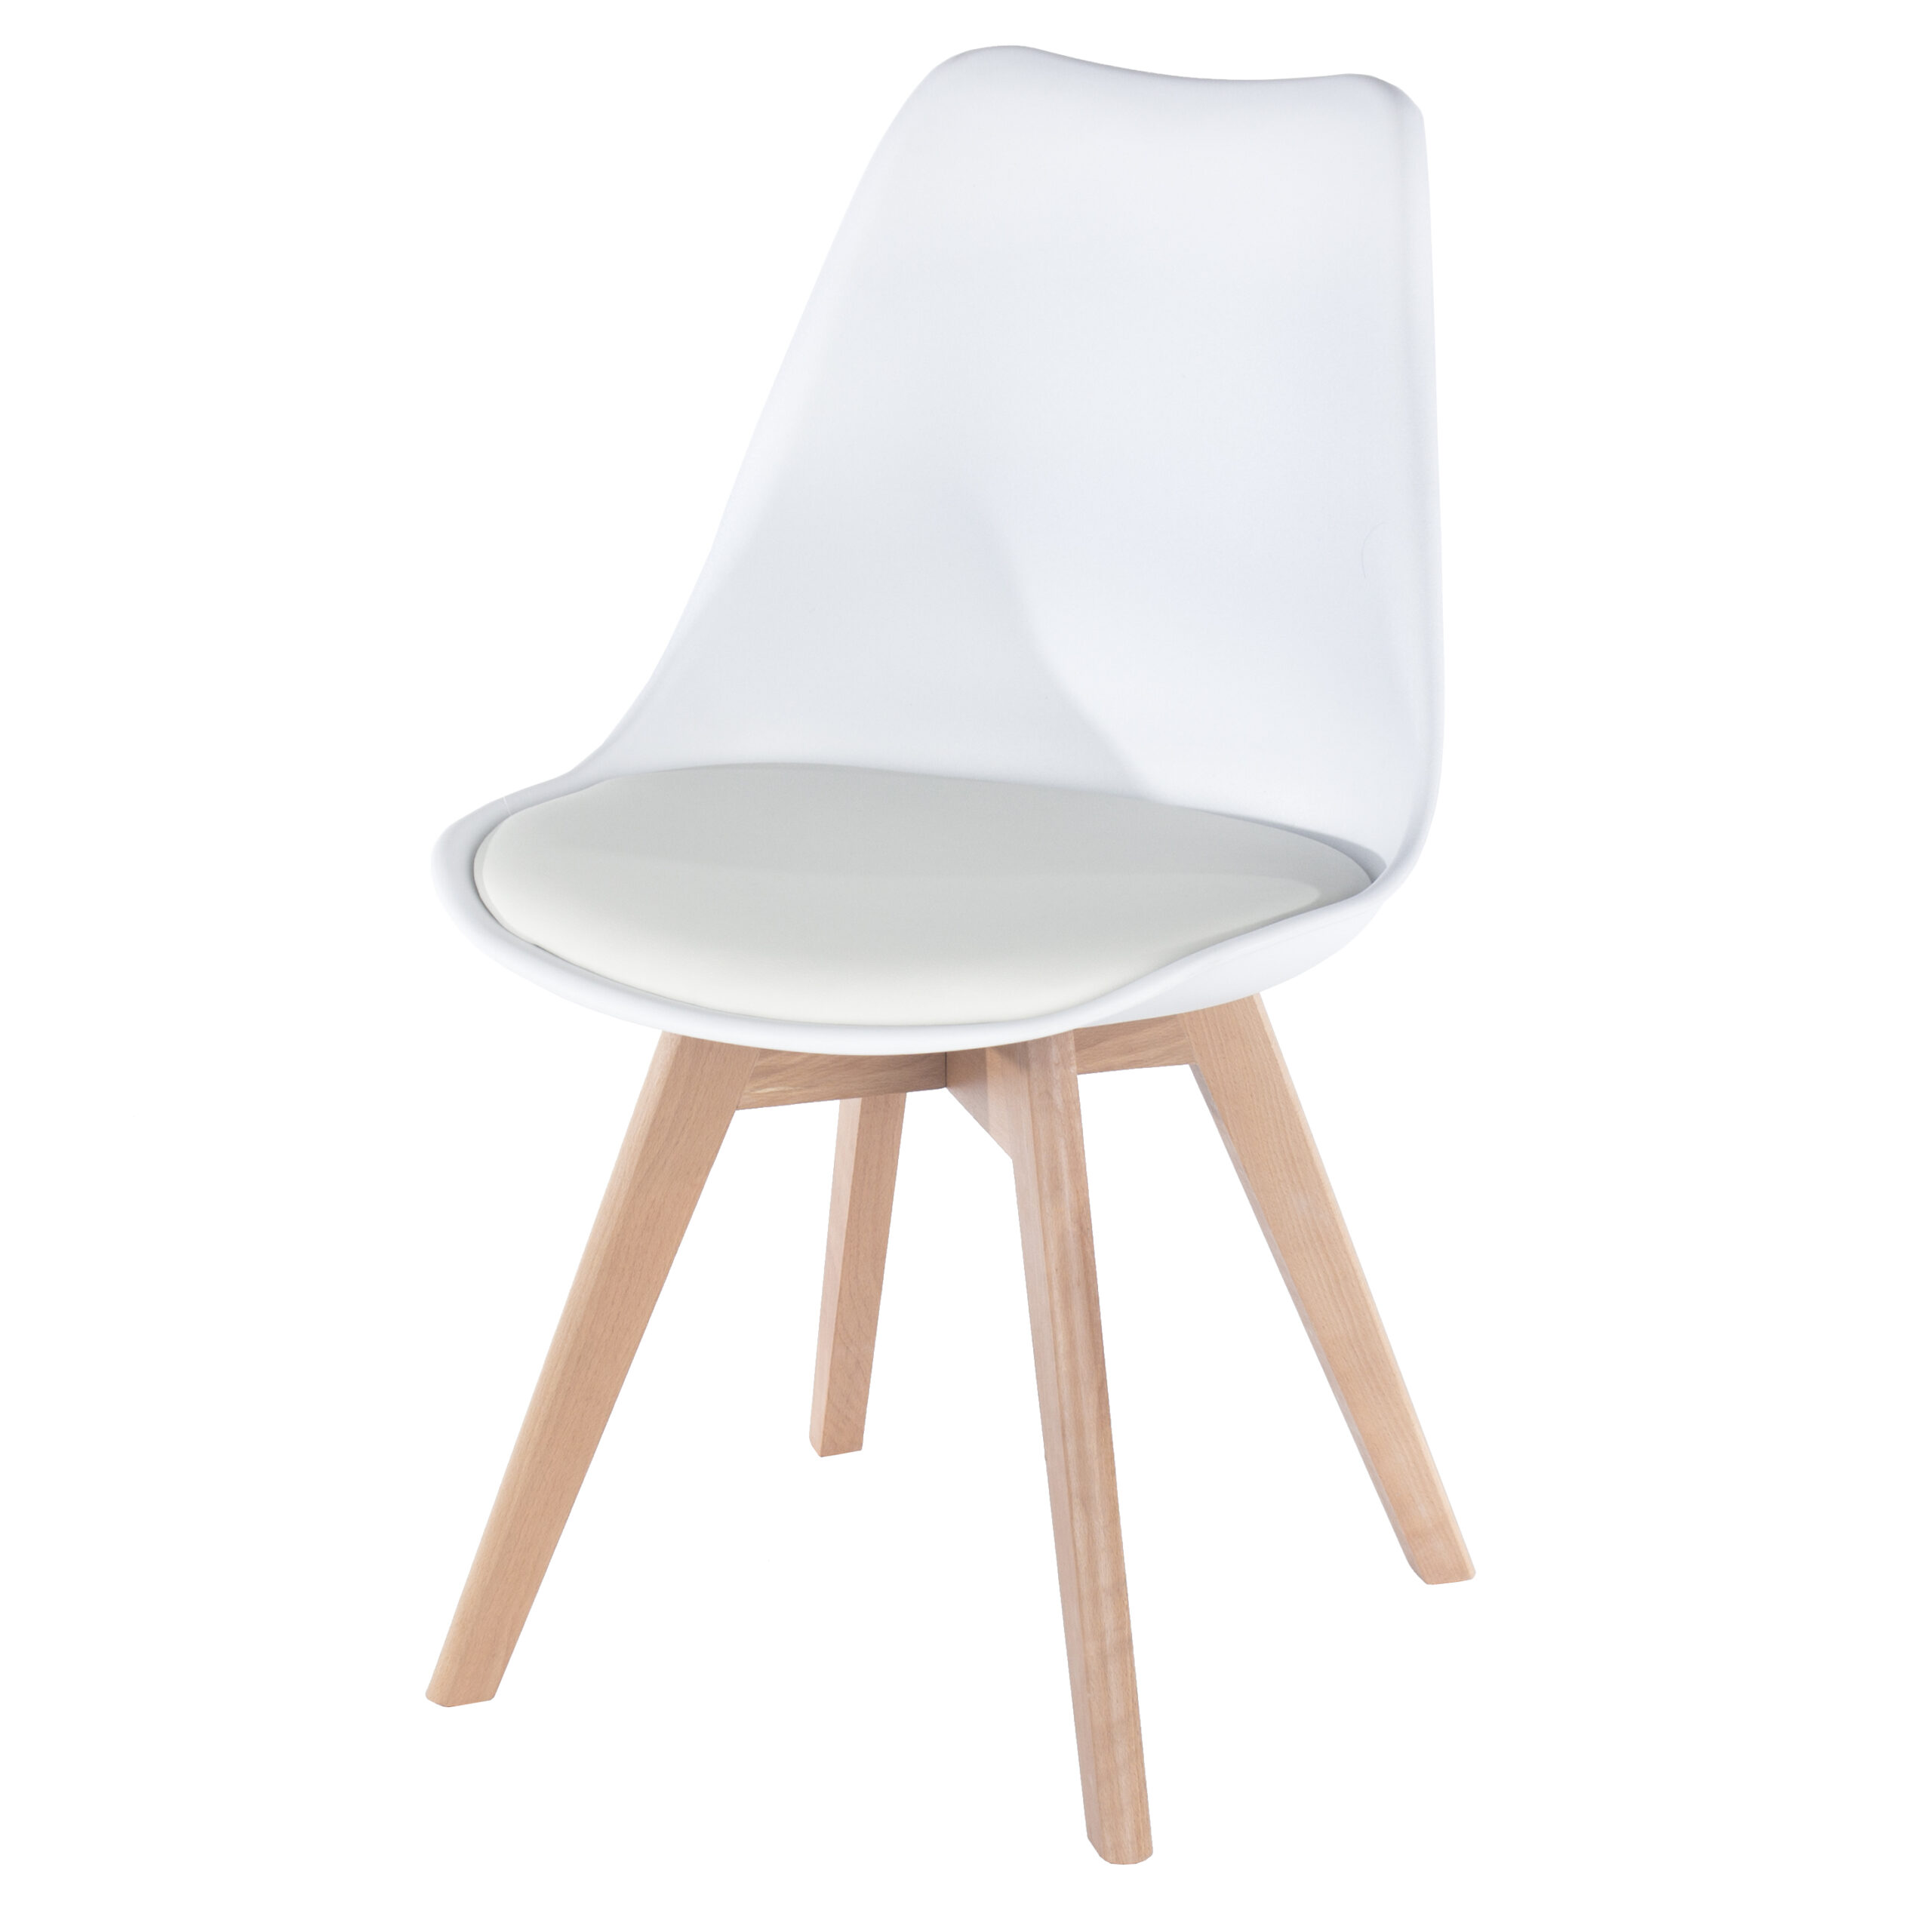 Penny white upholstered plastic chairs with wood legs (pair)